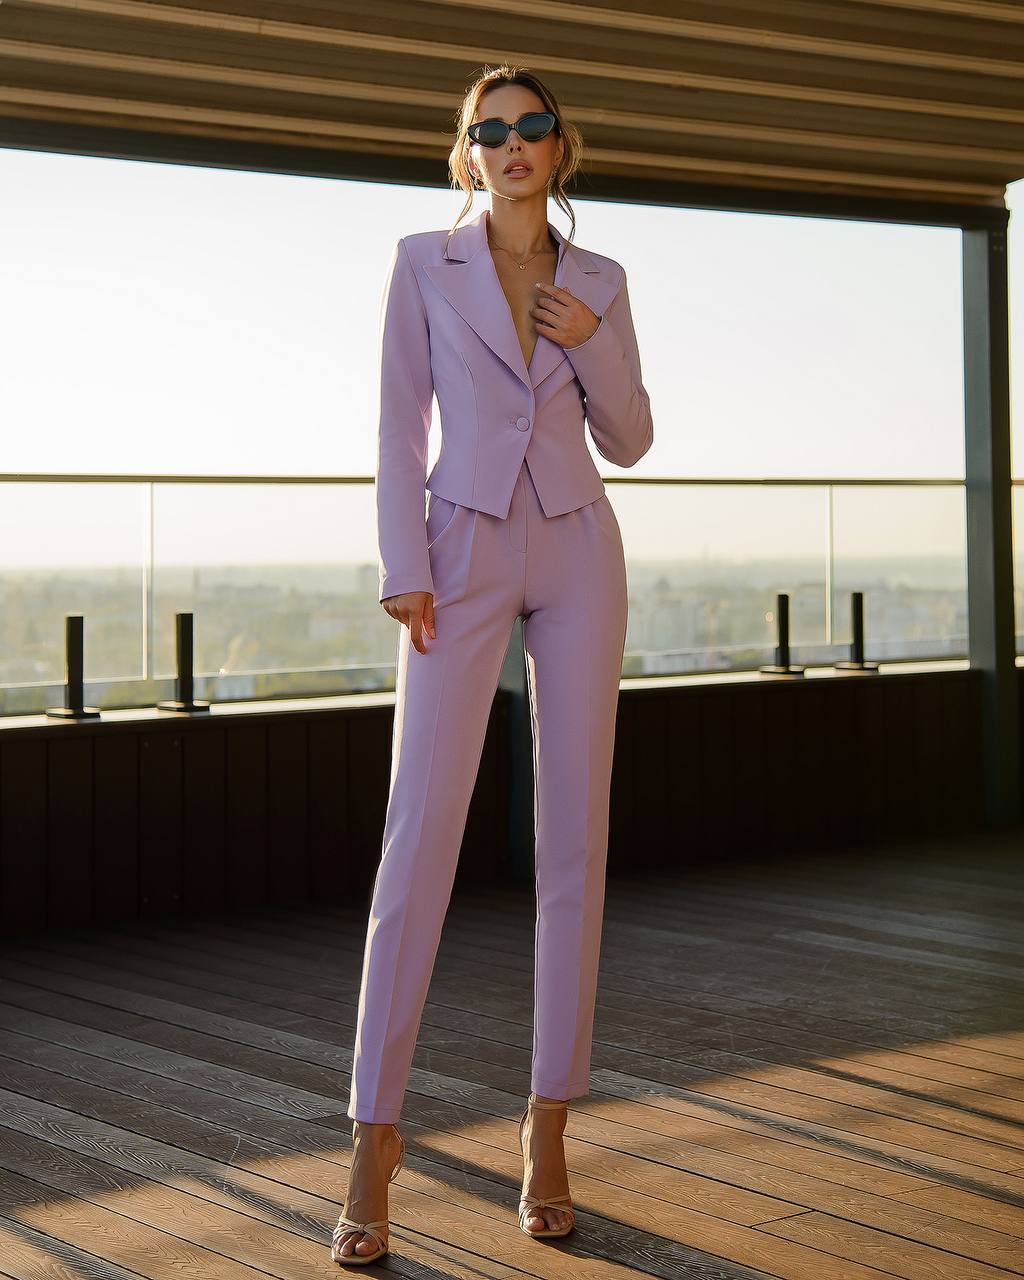 a woman in a purple suit posing for a picture